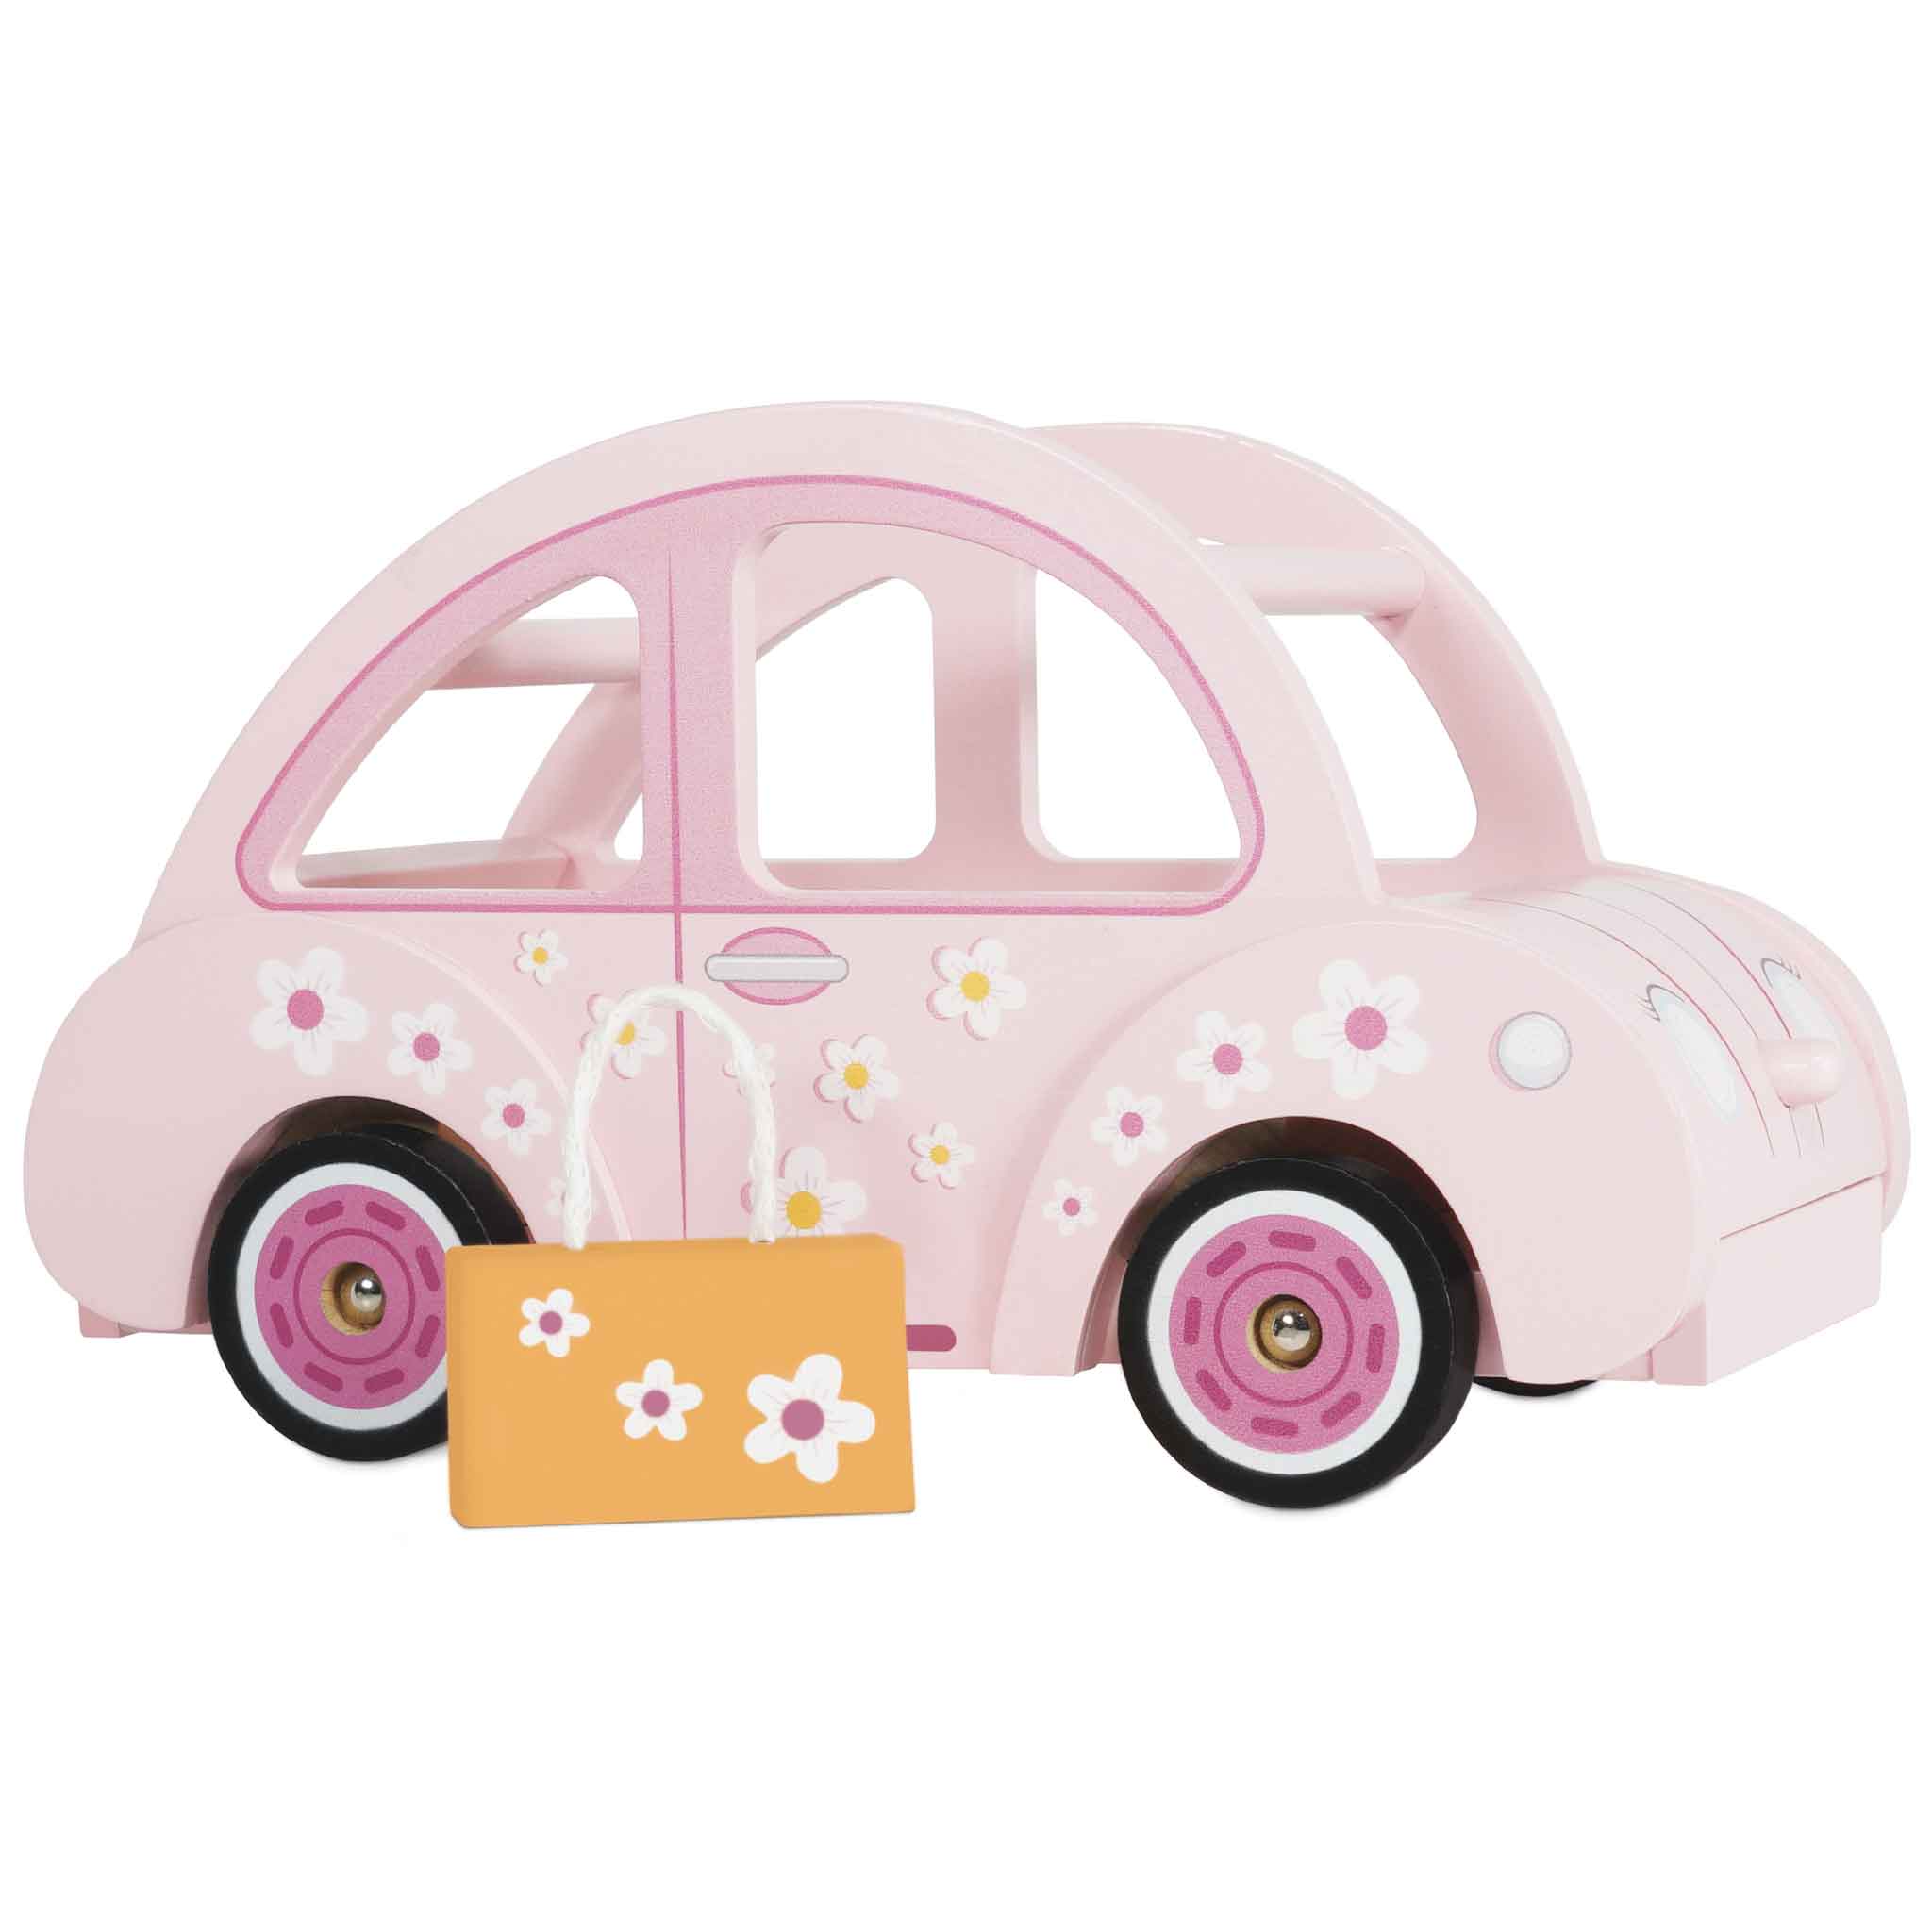 Sophie's Dolls House Toy Car